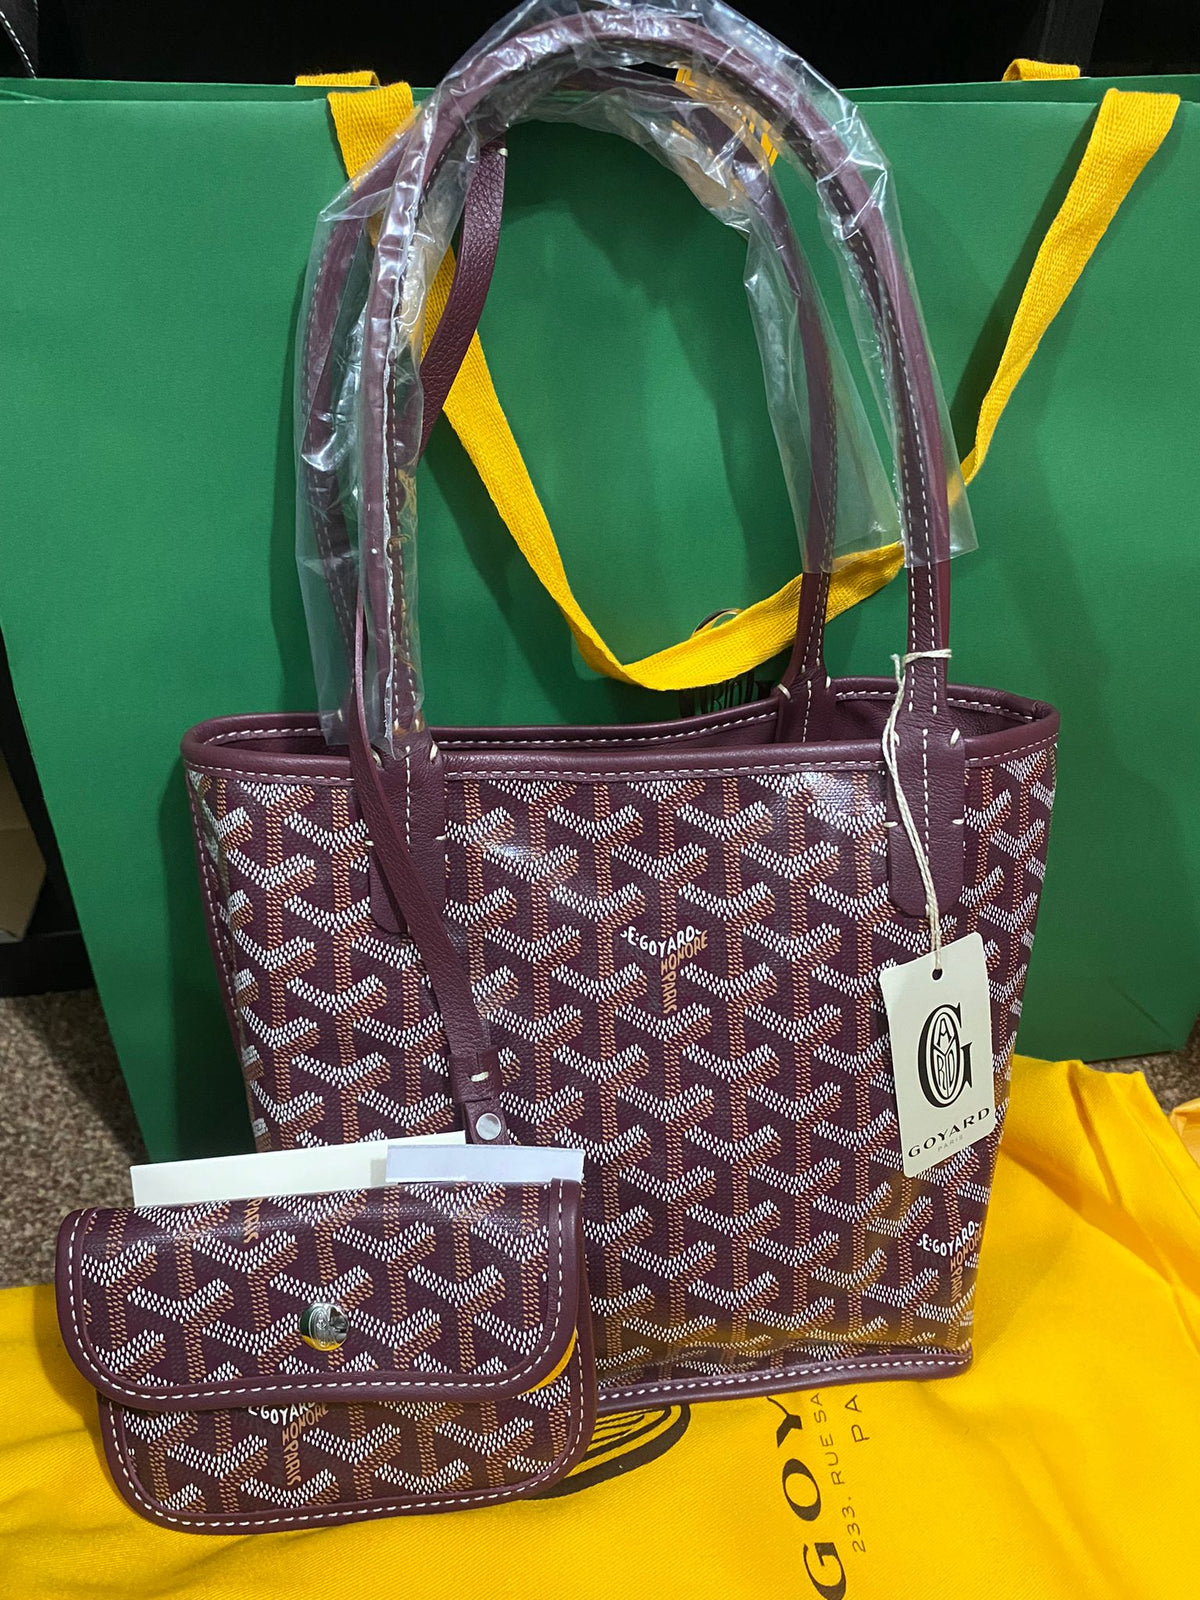 Check Out Our Exciting Line of Goyard Anjou Mini Bag (Burgundy